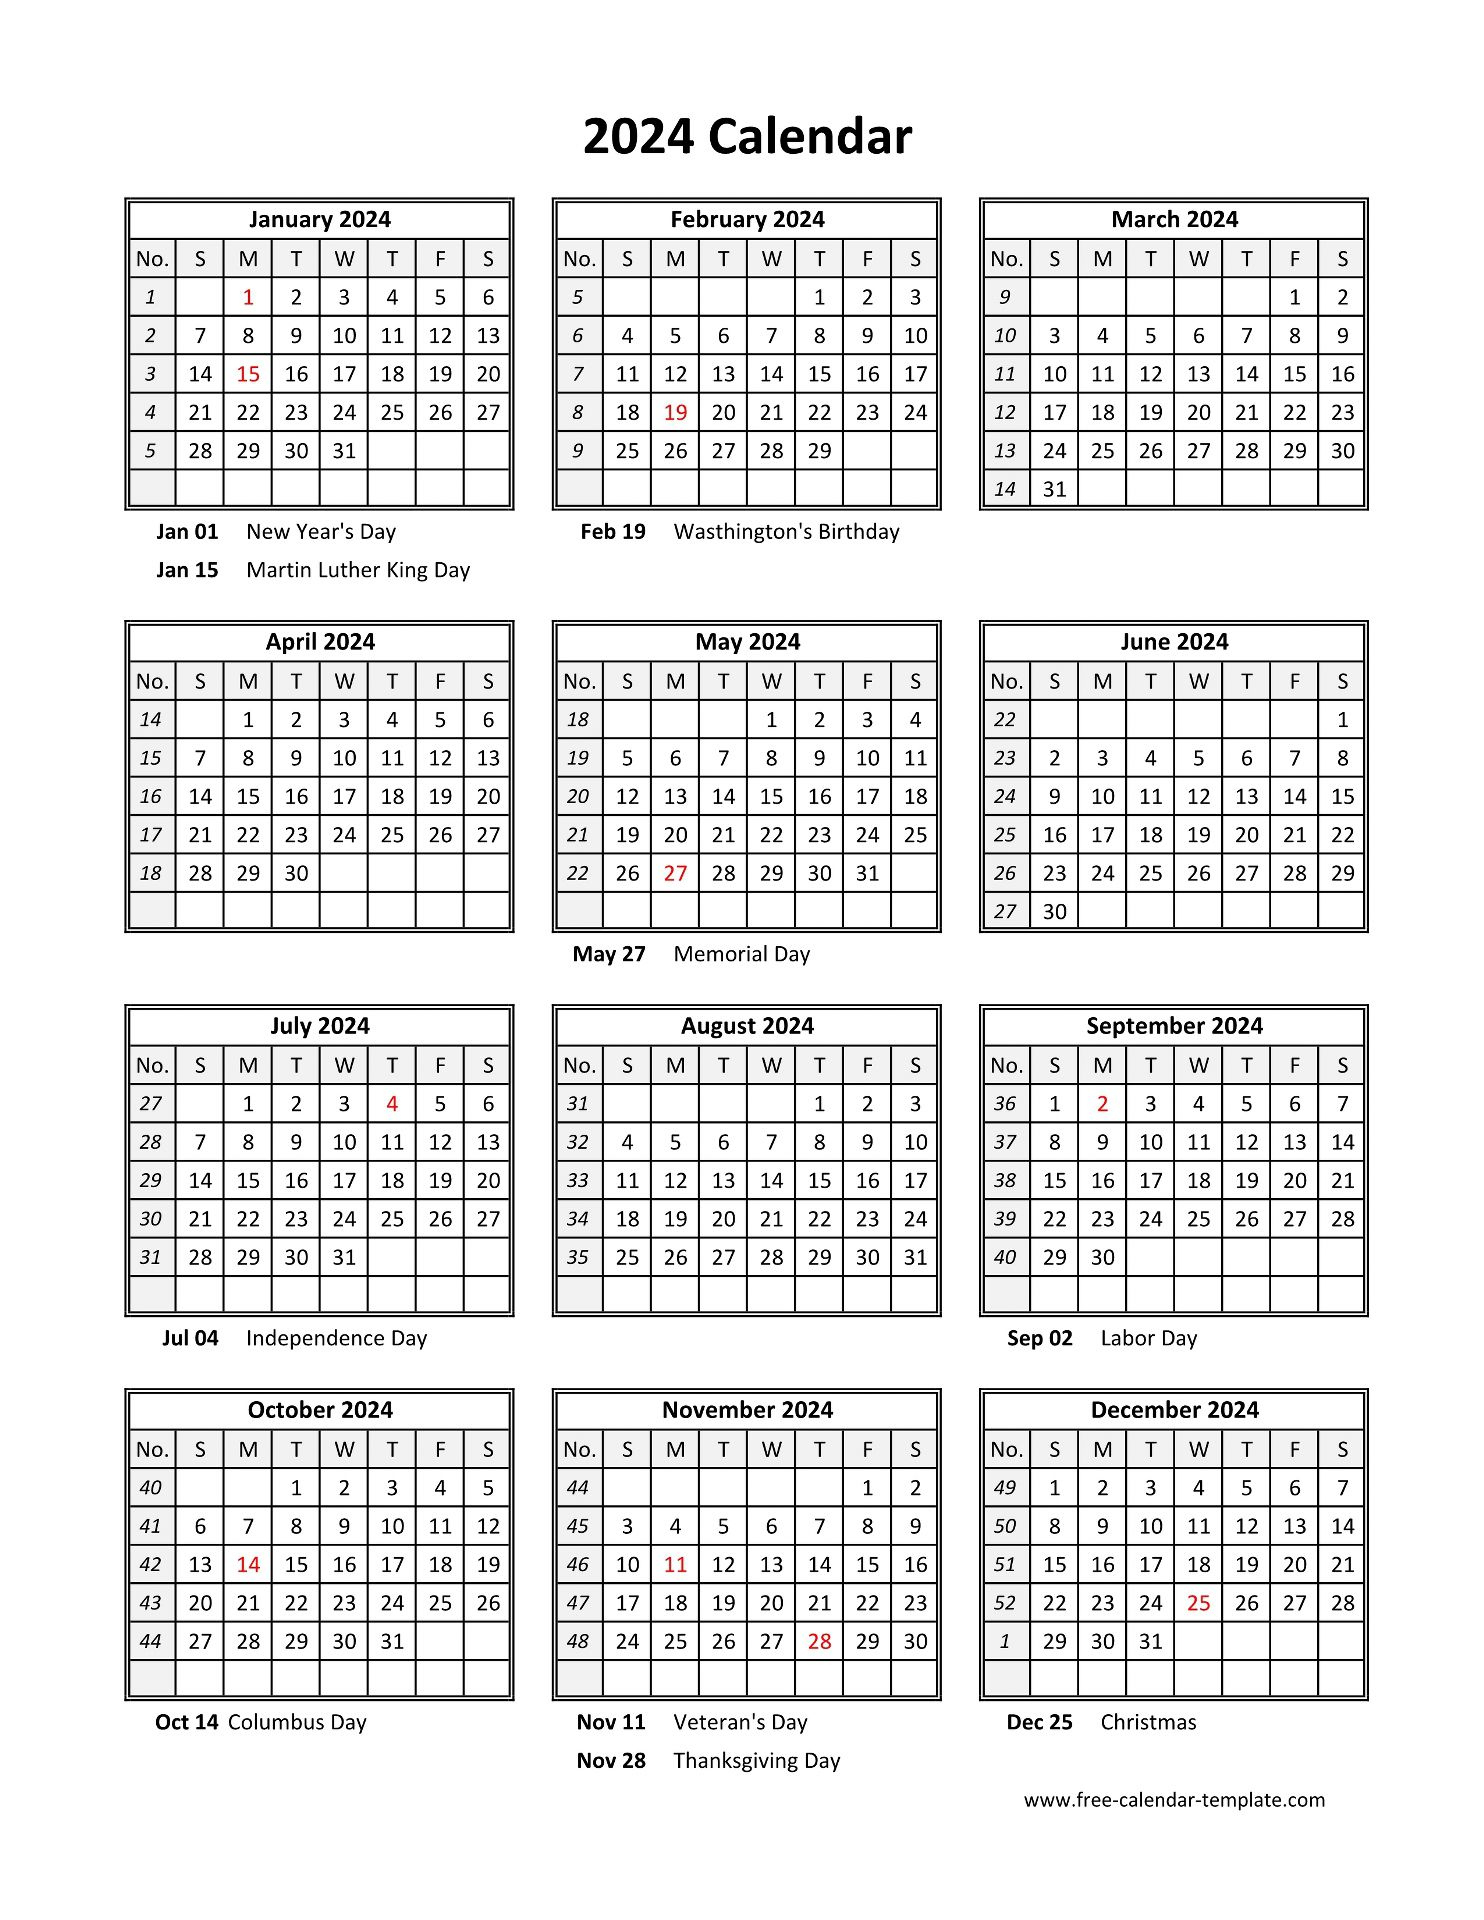 Yearly Printable Calendar 2024 With Holidays | Free-Calendar | Printable Calendar 2024 One Page Word